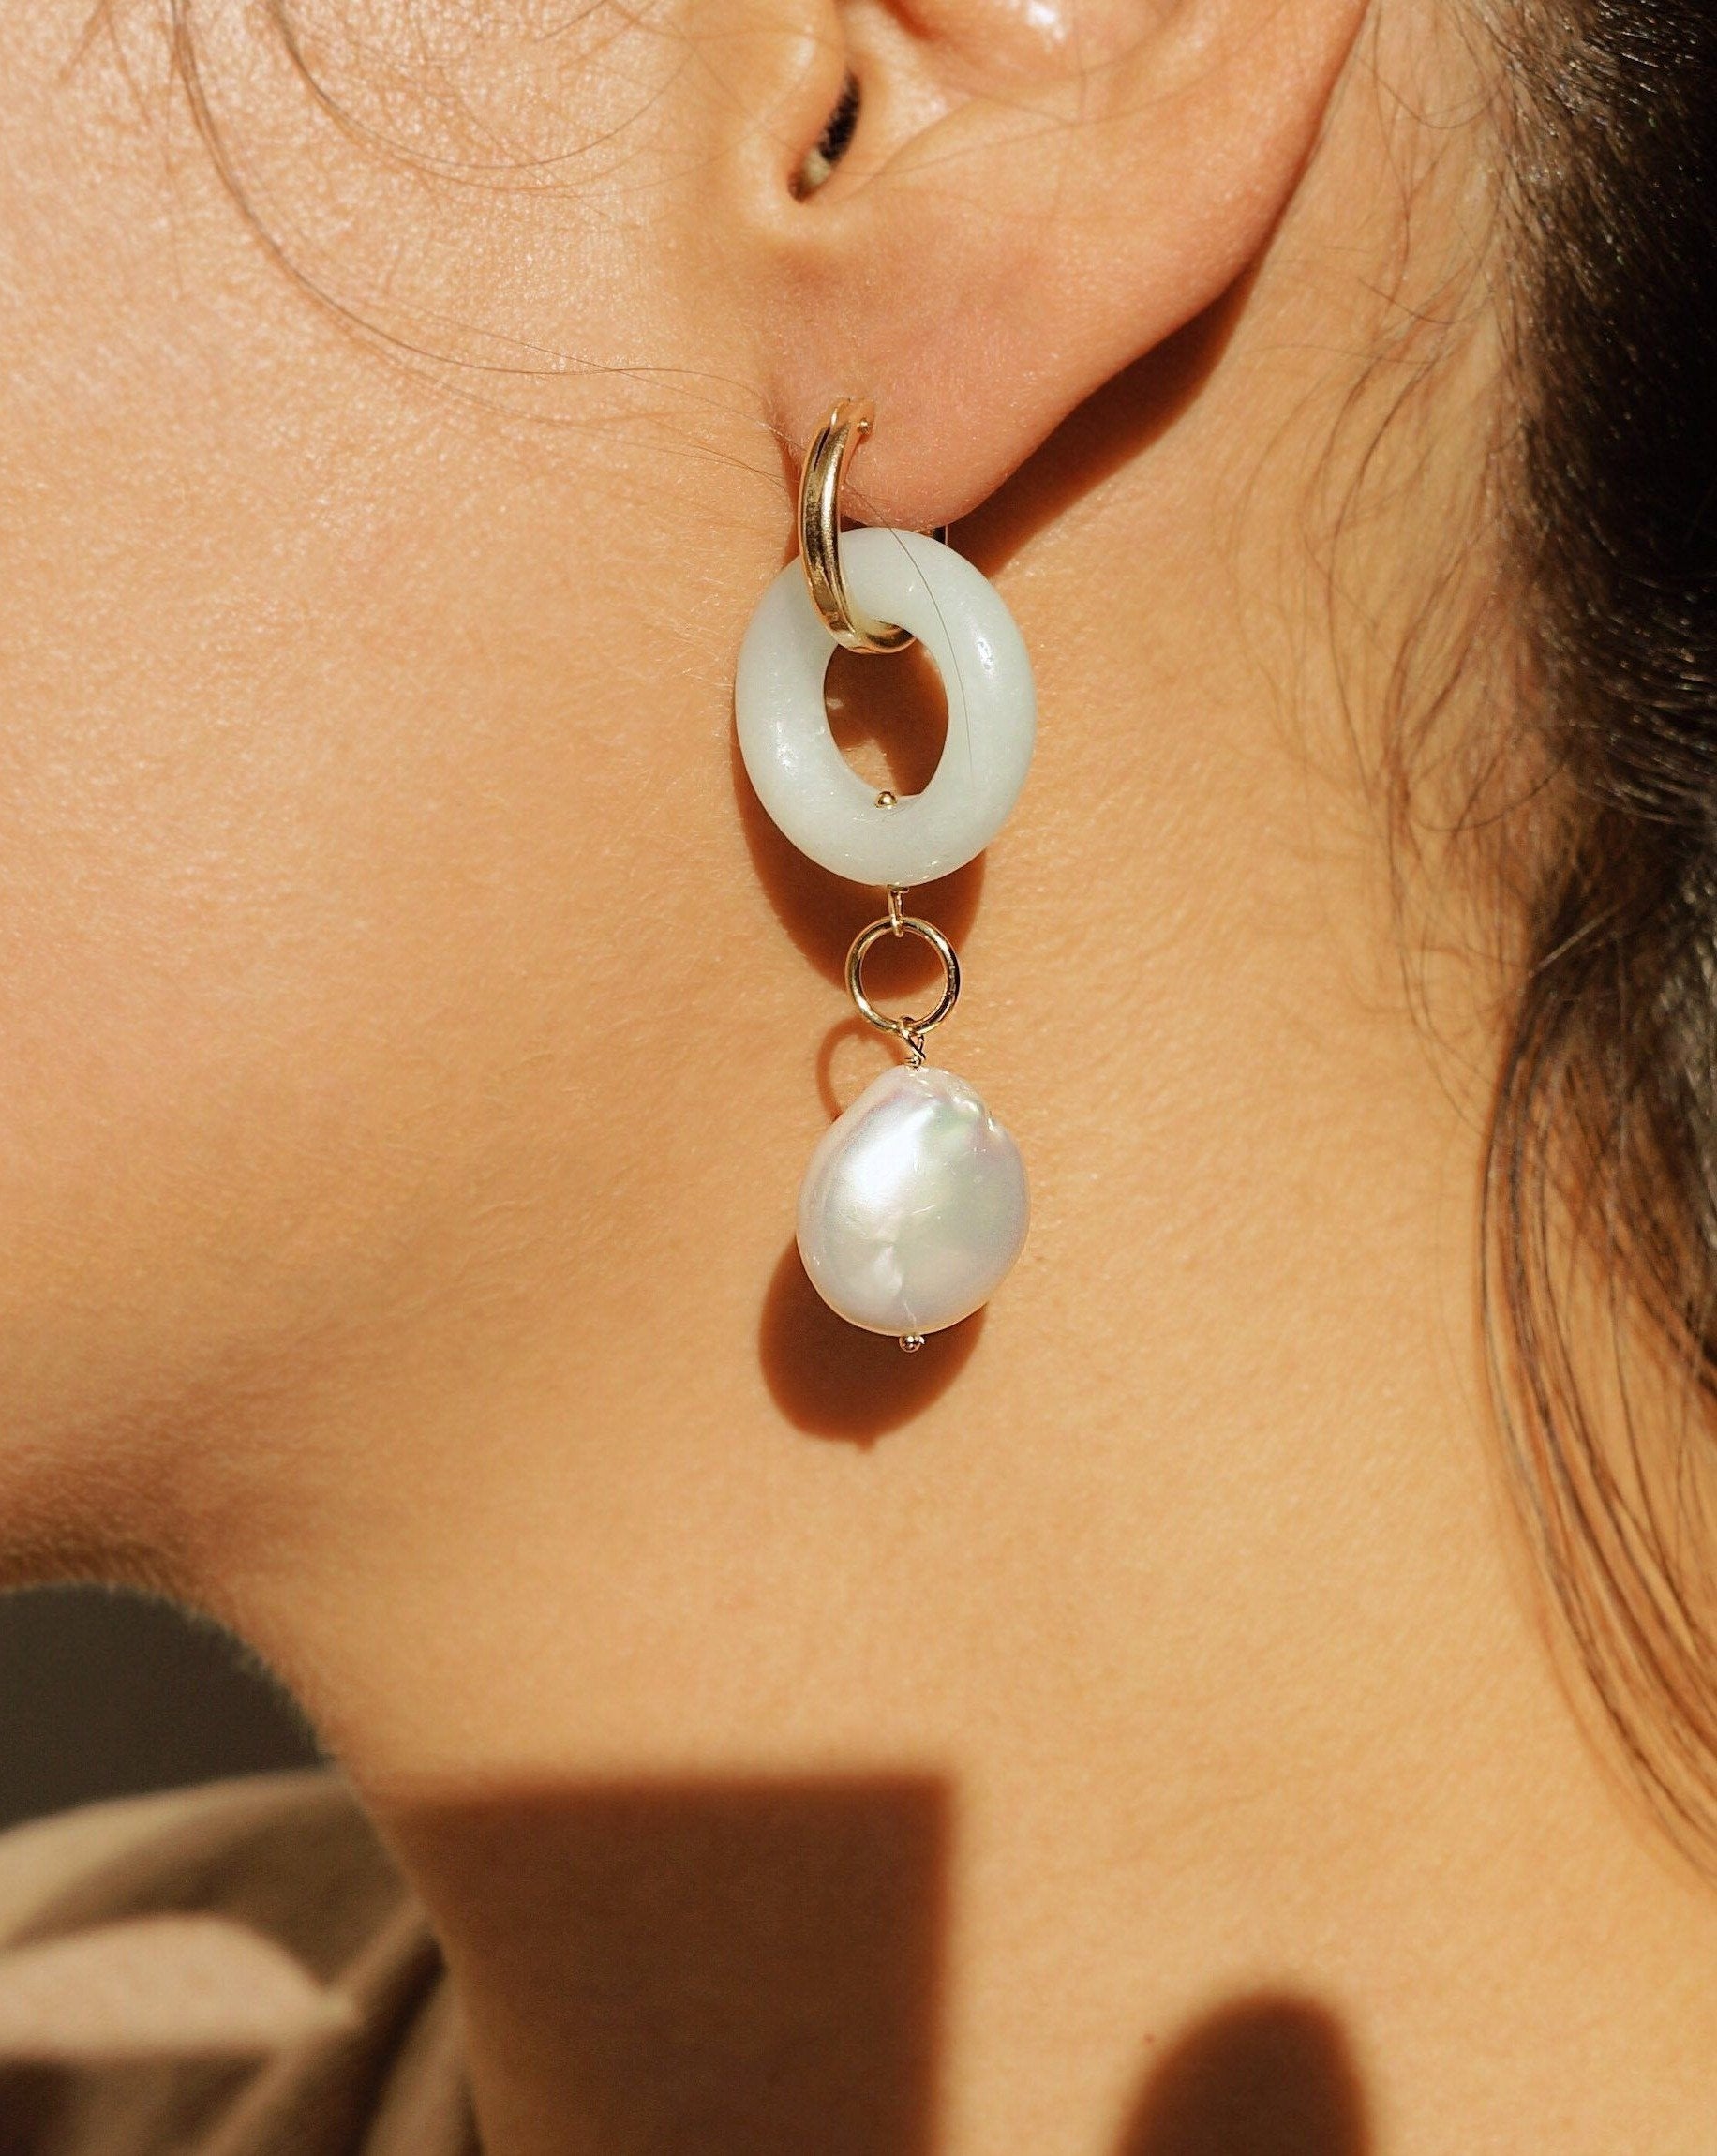 Cerceau Pearl Hoops by Kozakh. 15mm hoop dangling earrings with snap closure, crafted in 14K Gold Filled, featuring a doughnut shape Amazonite gemstone and a Baroque Pearl.